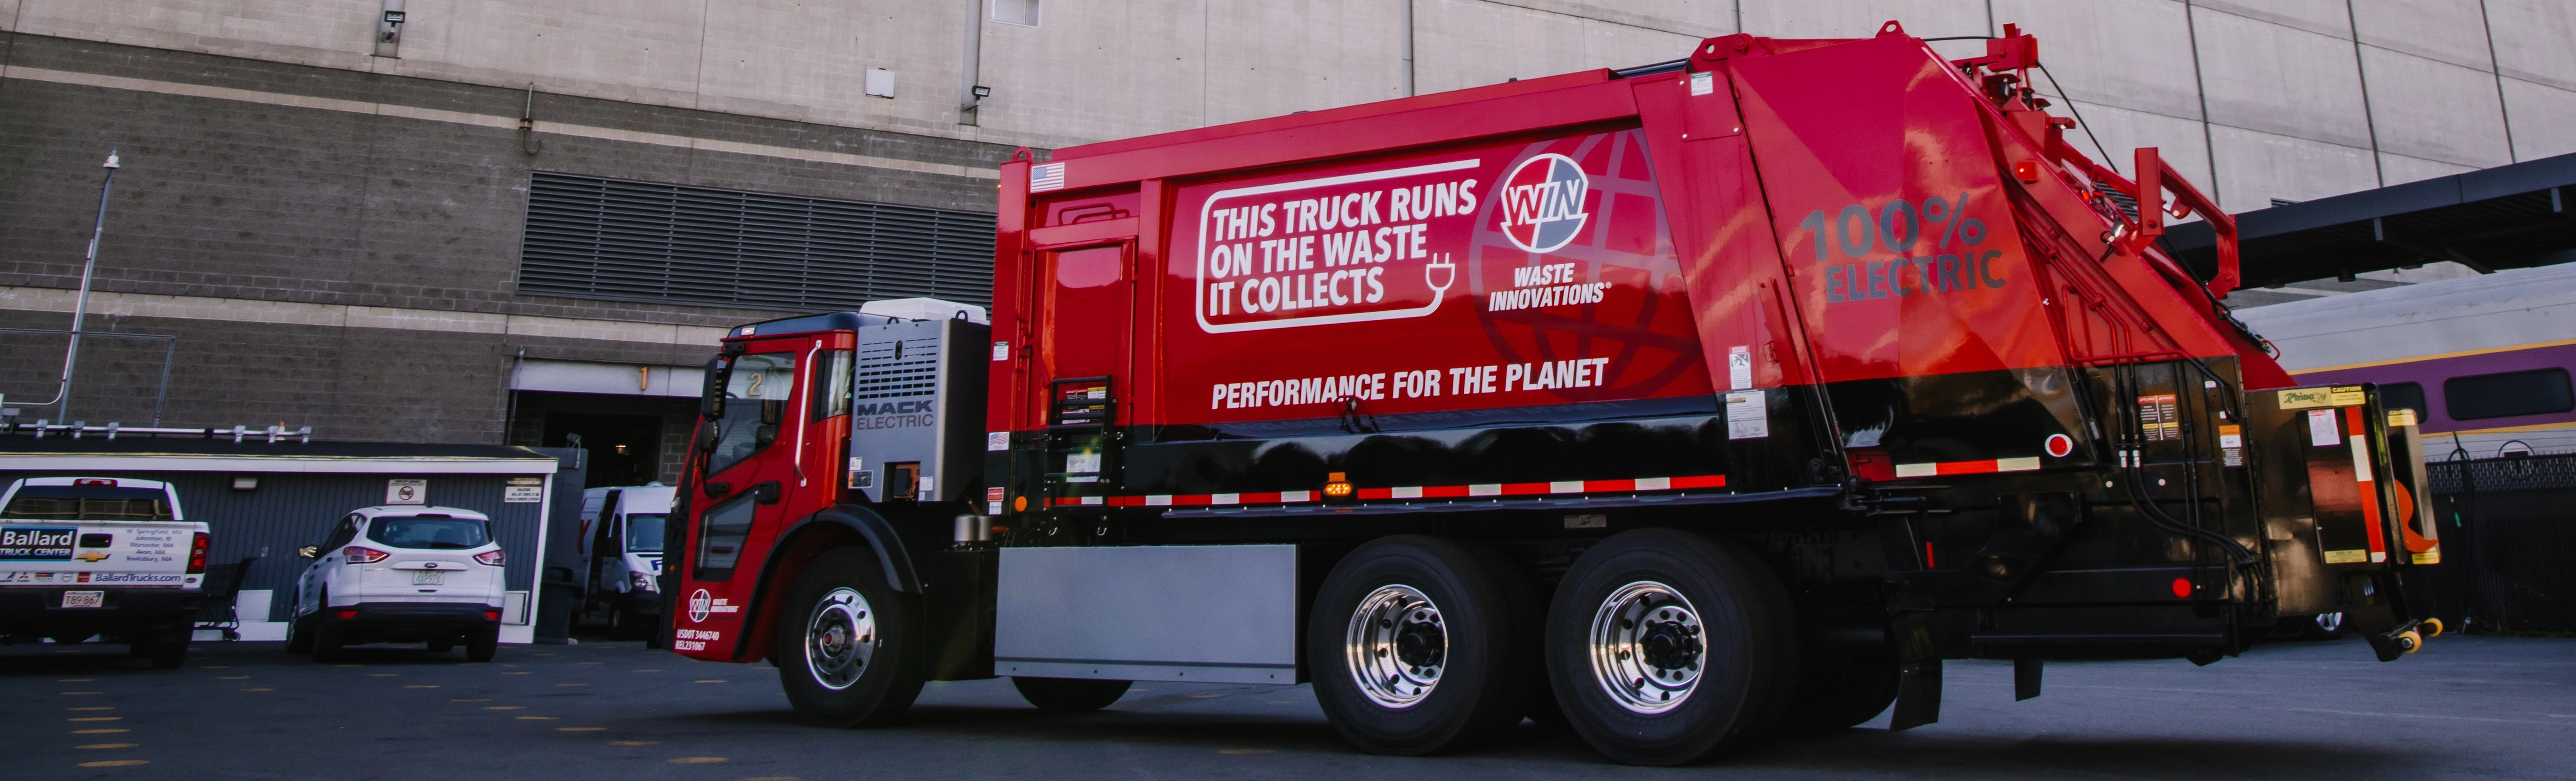 red electric trash truck owned by WIN Waste Innovations in front of the TD Garden in Boston, MA.